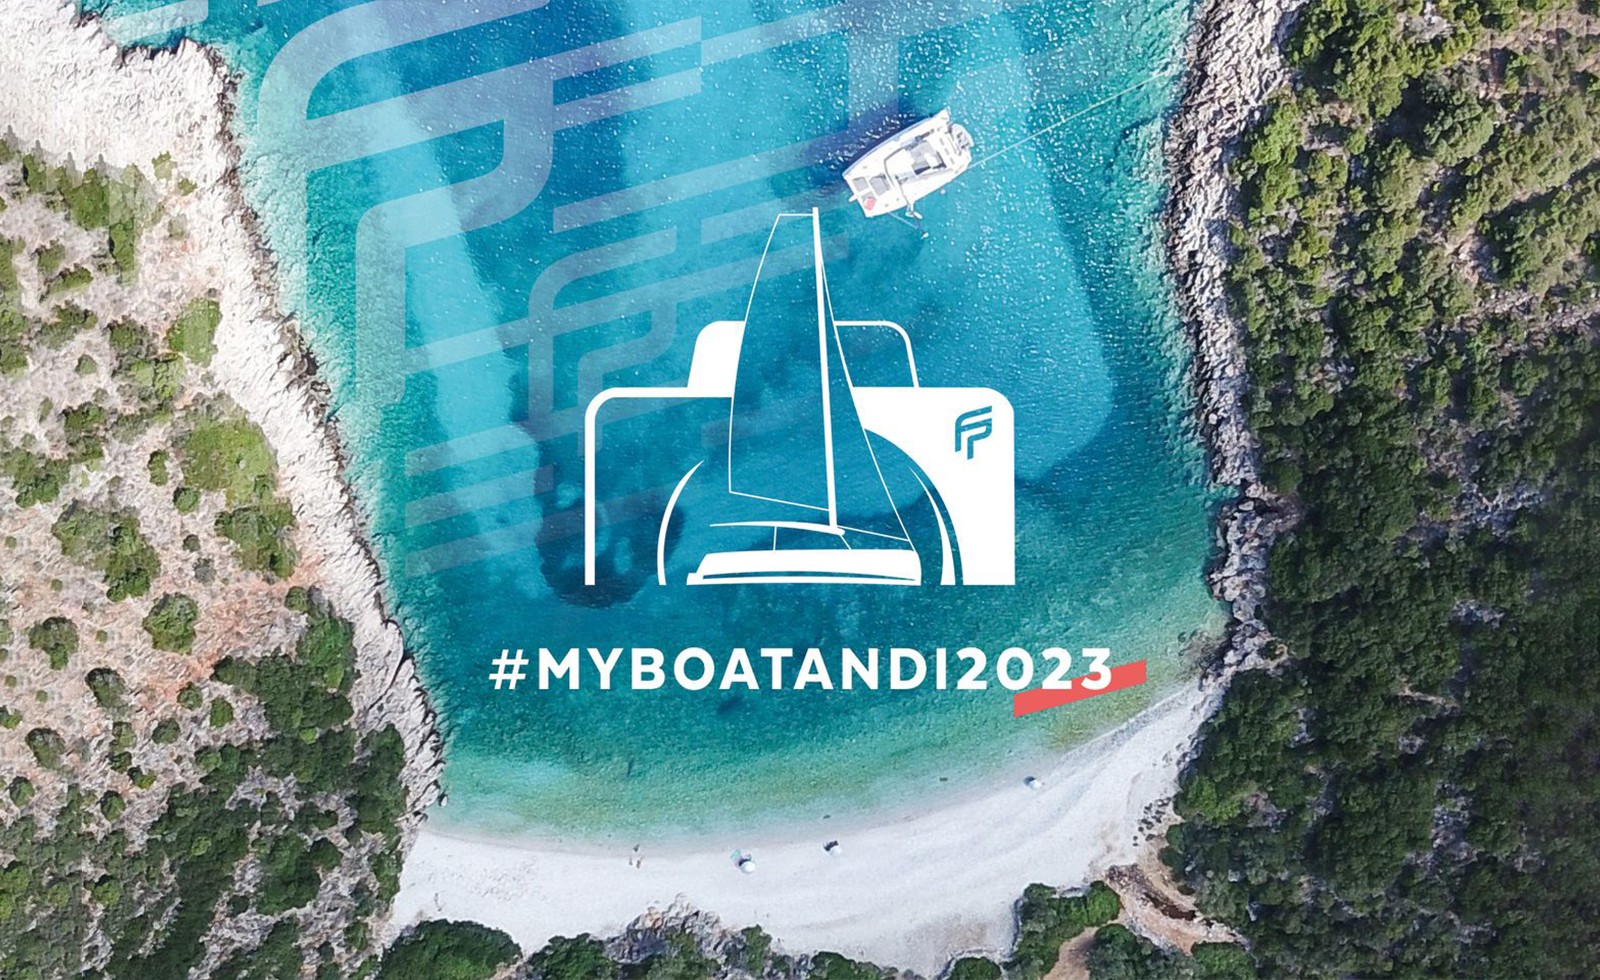 Fountaine Pajot announced the #MyBoatAndI2023 photo contest exclusively for Fountaine Pajot owners